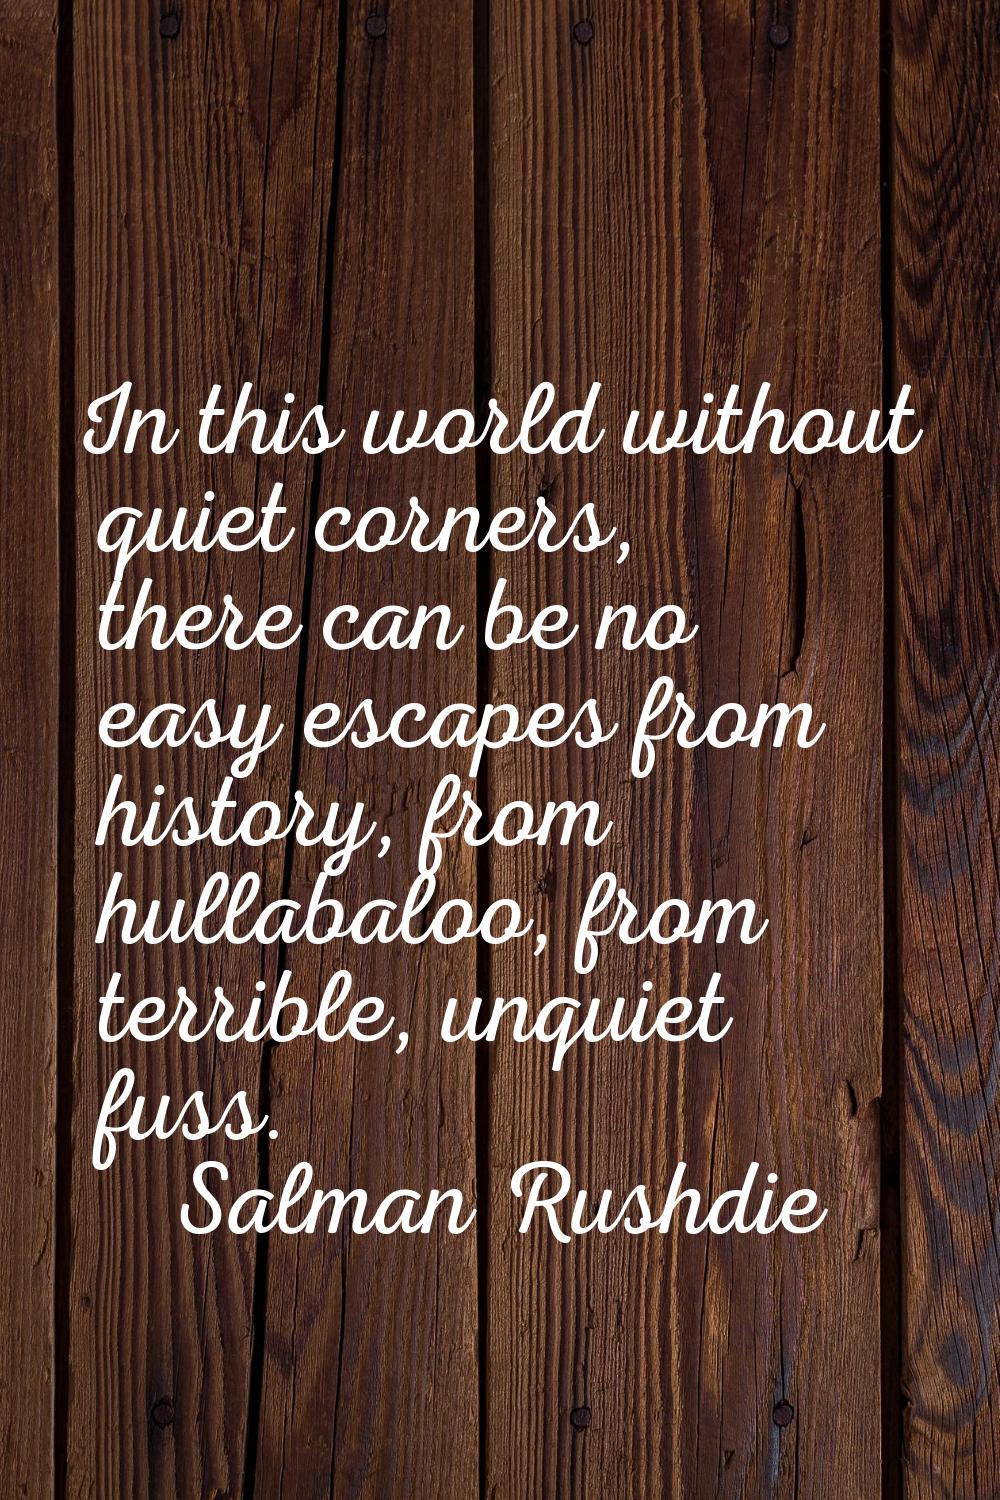 In this world without quiet corners, there can be no easy escapes from history, from hullabaloo, fr